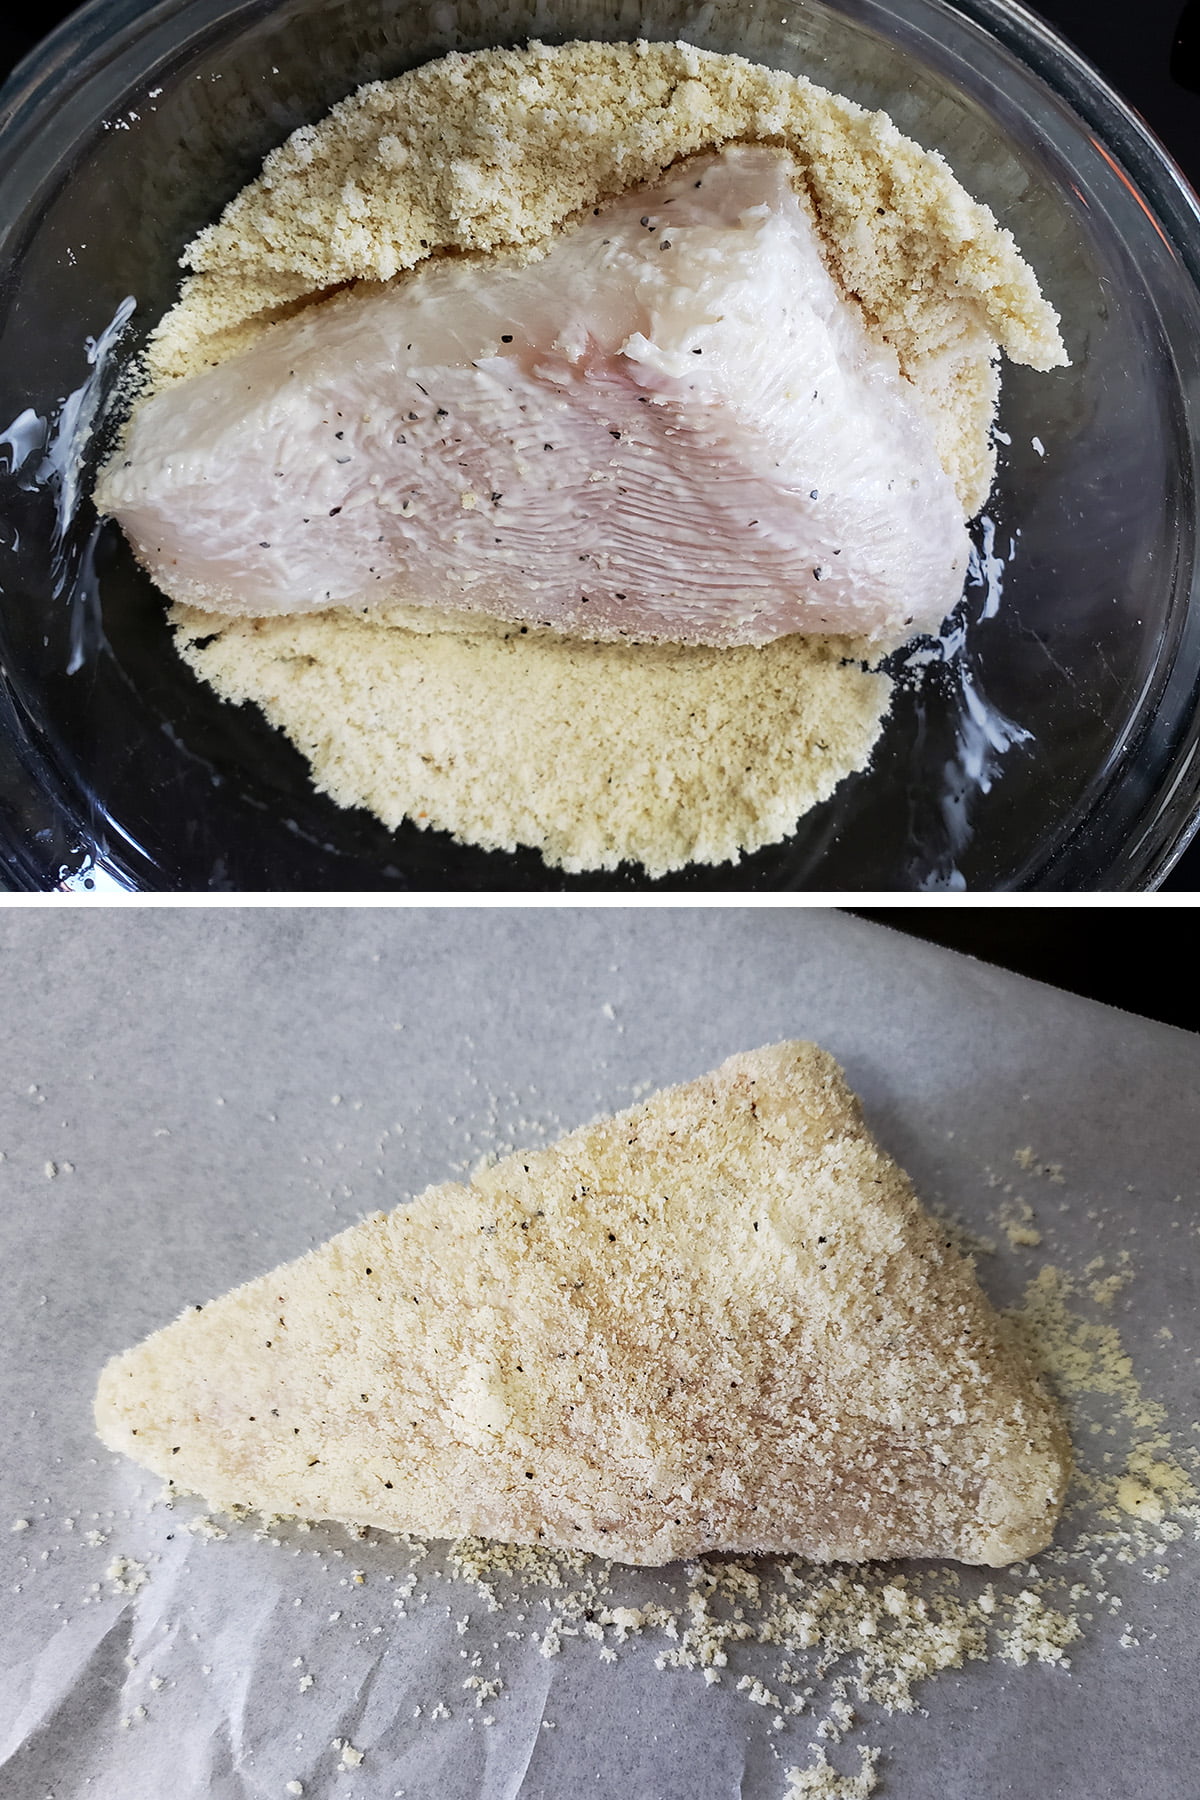 A two part image showing a halibut steak being coated in seasoned almond meal, and the coated halibut steak on a parchment lined baking sheet.